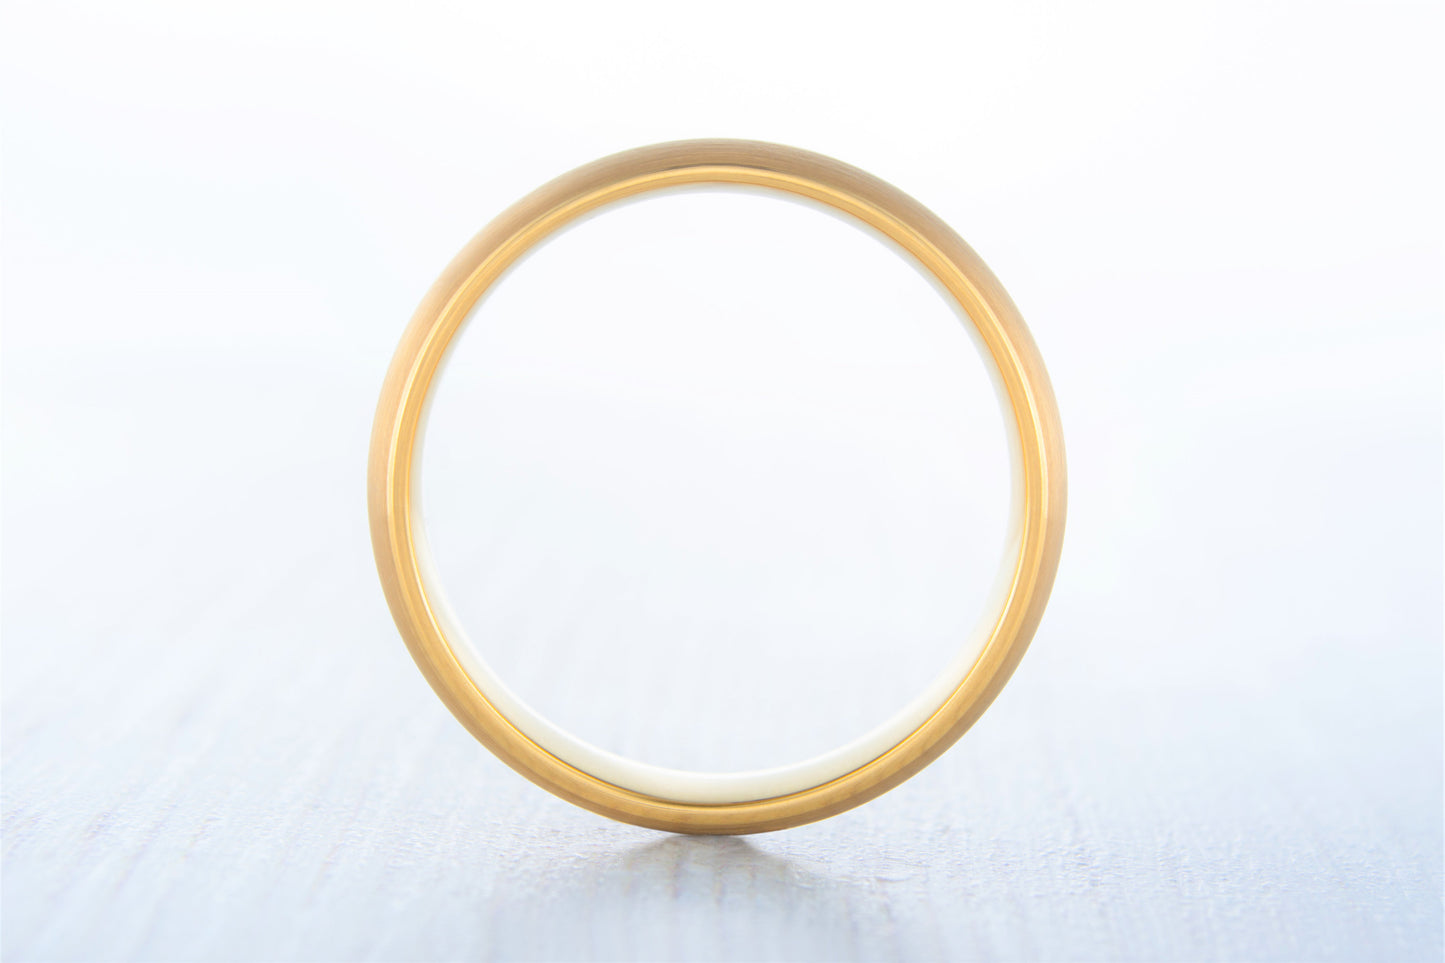 6mm 18K Yellow Gold and Brushed Titanium Wedding ring band for men and women